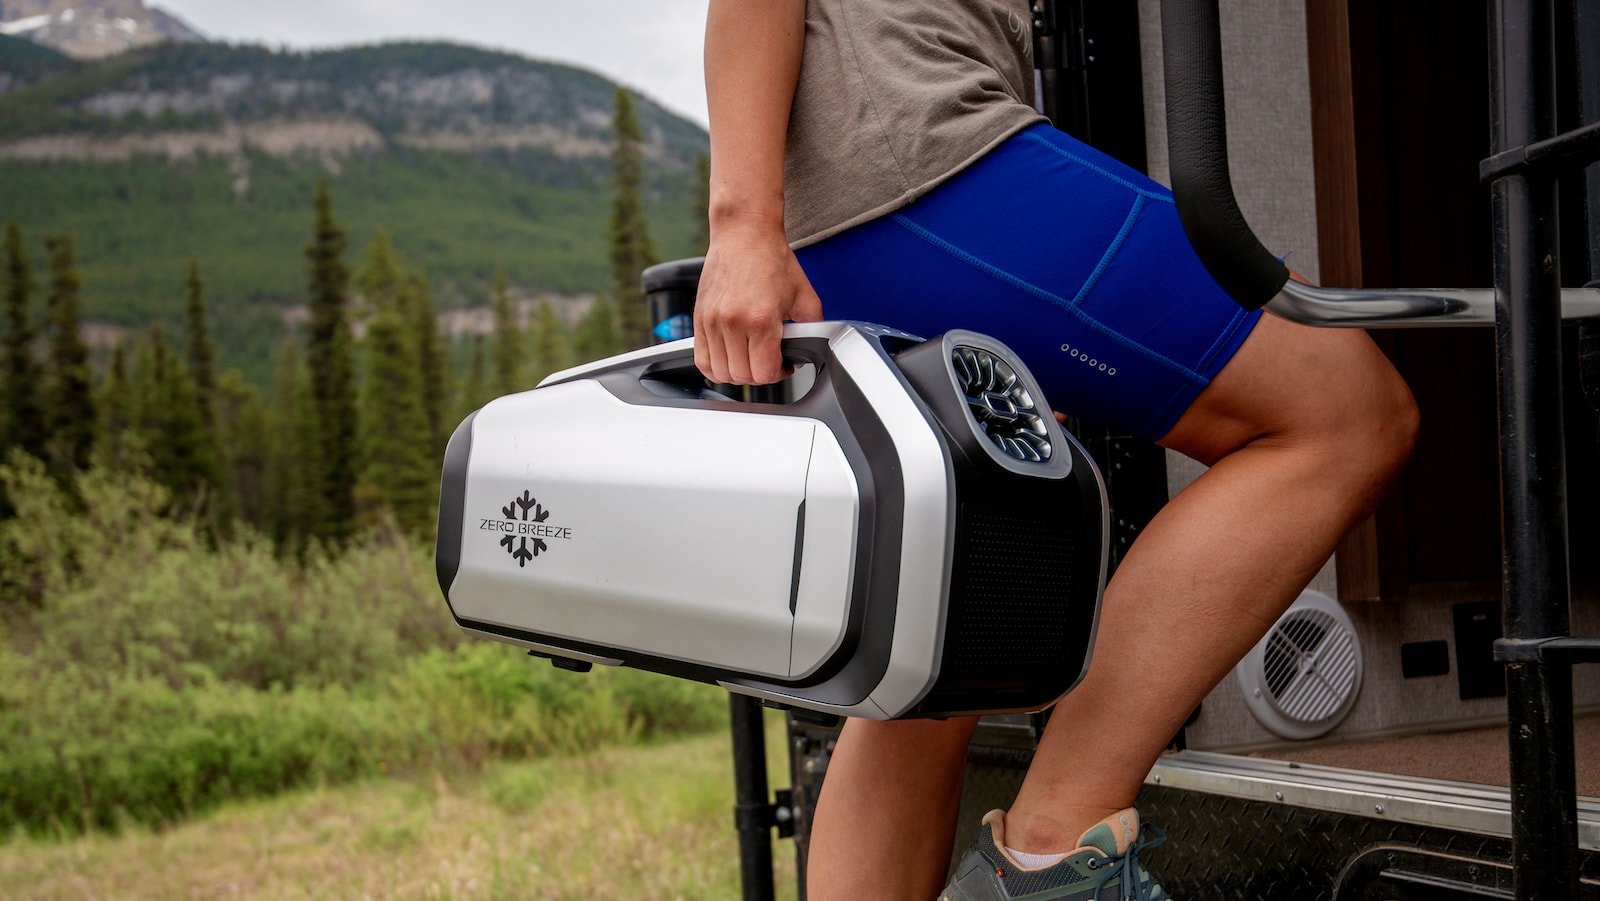 Zero Breeze Mark 2 A/C series has a compact design that’s ideal for taking on the go